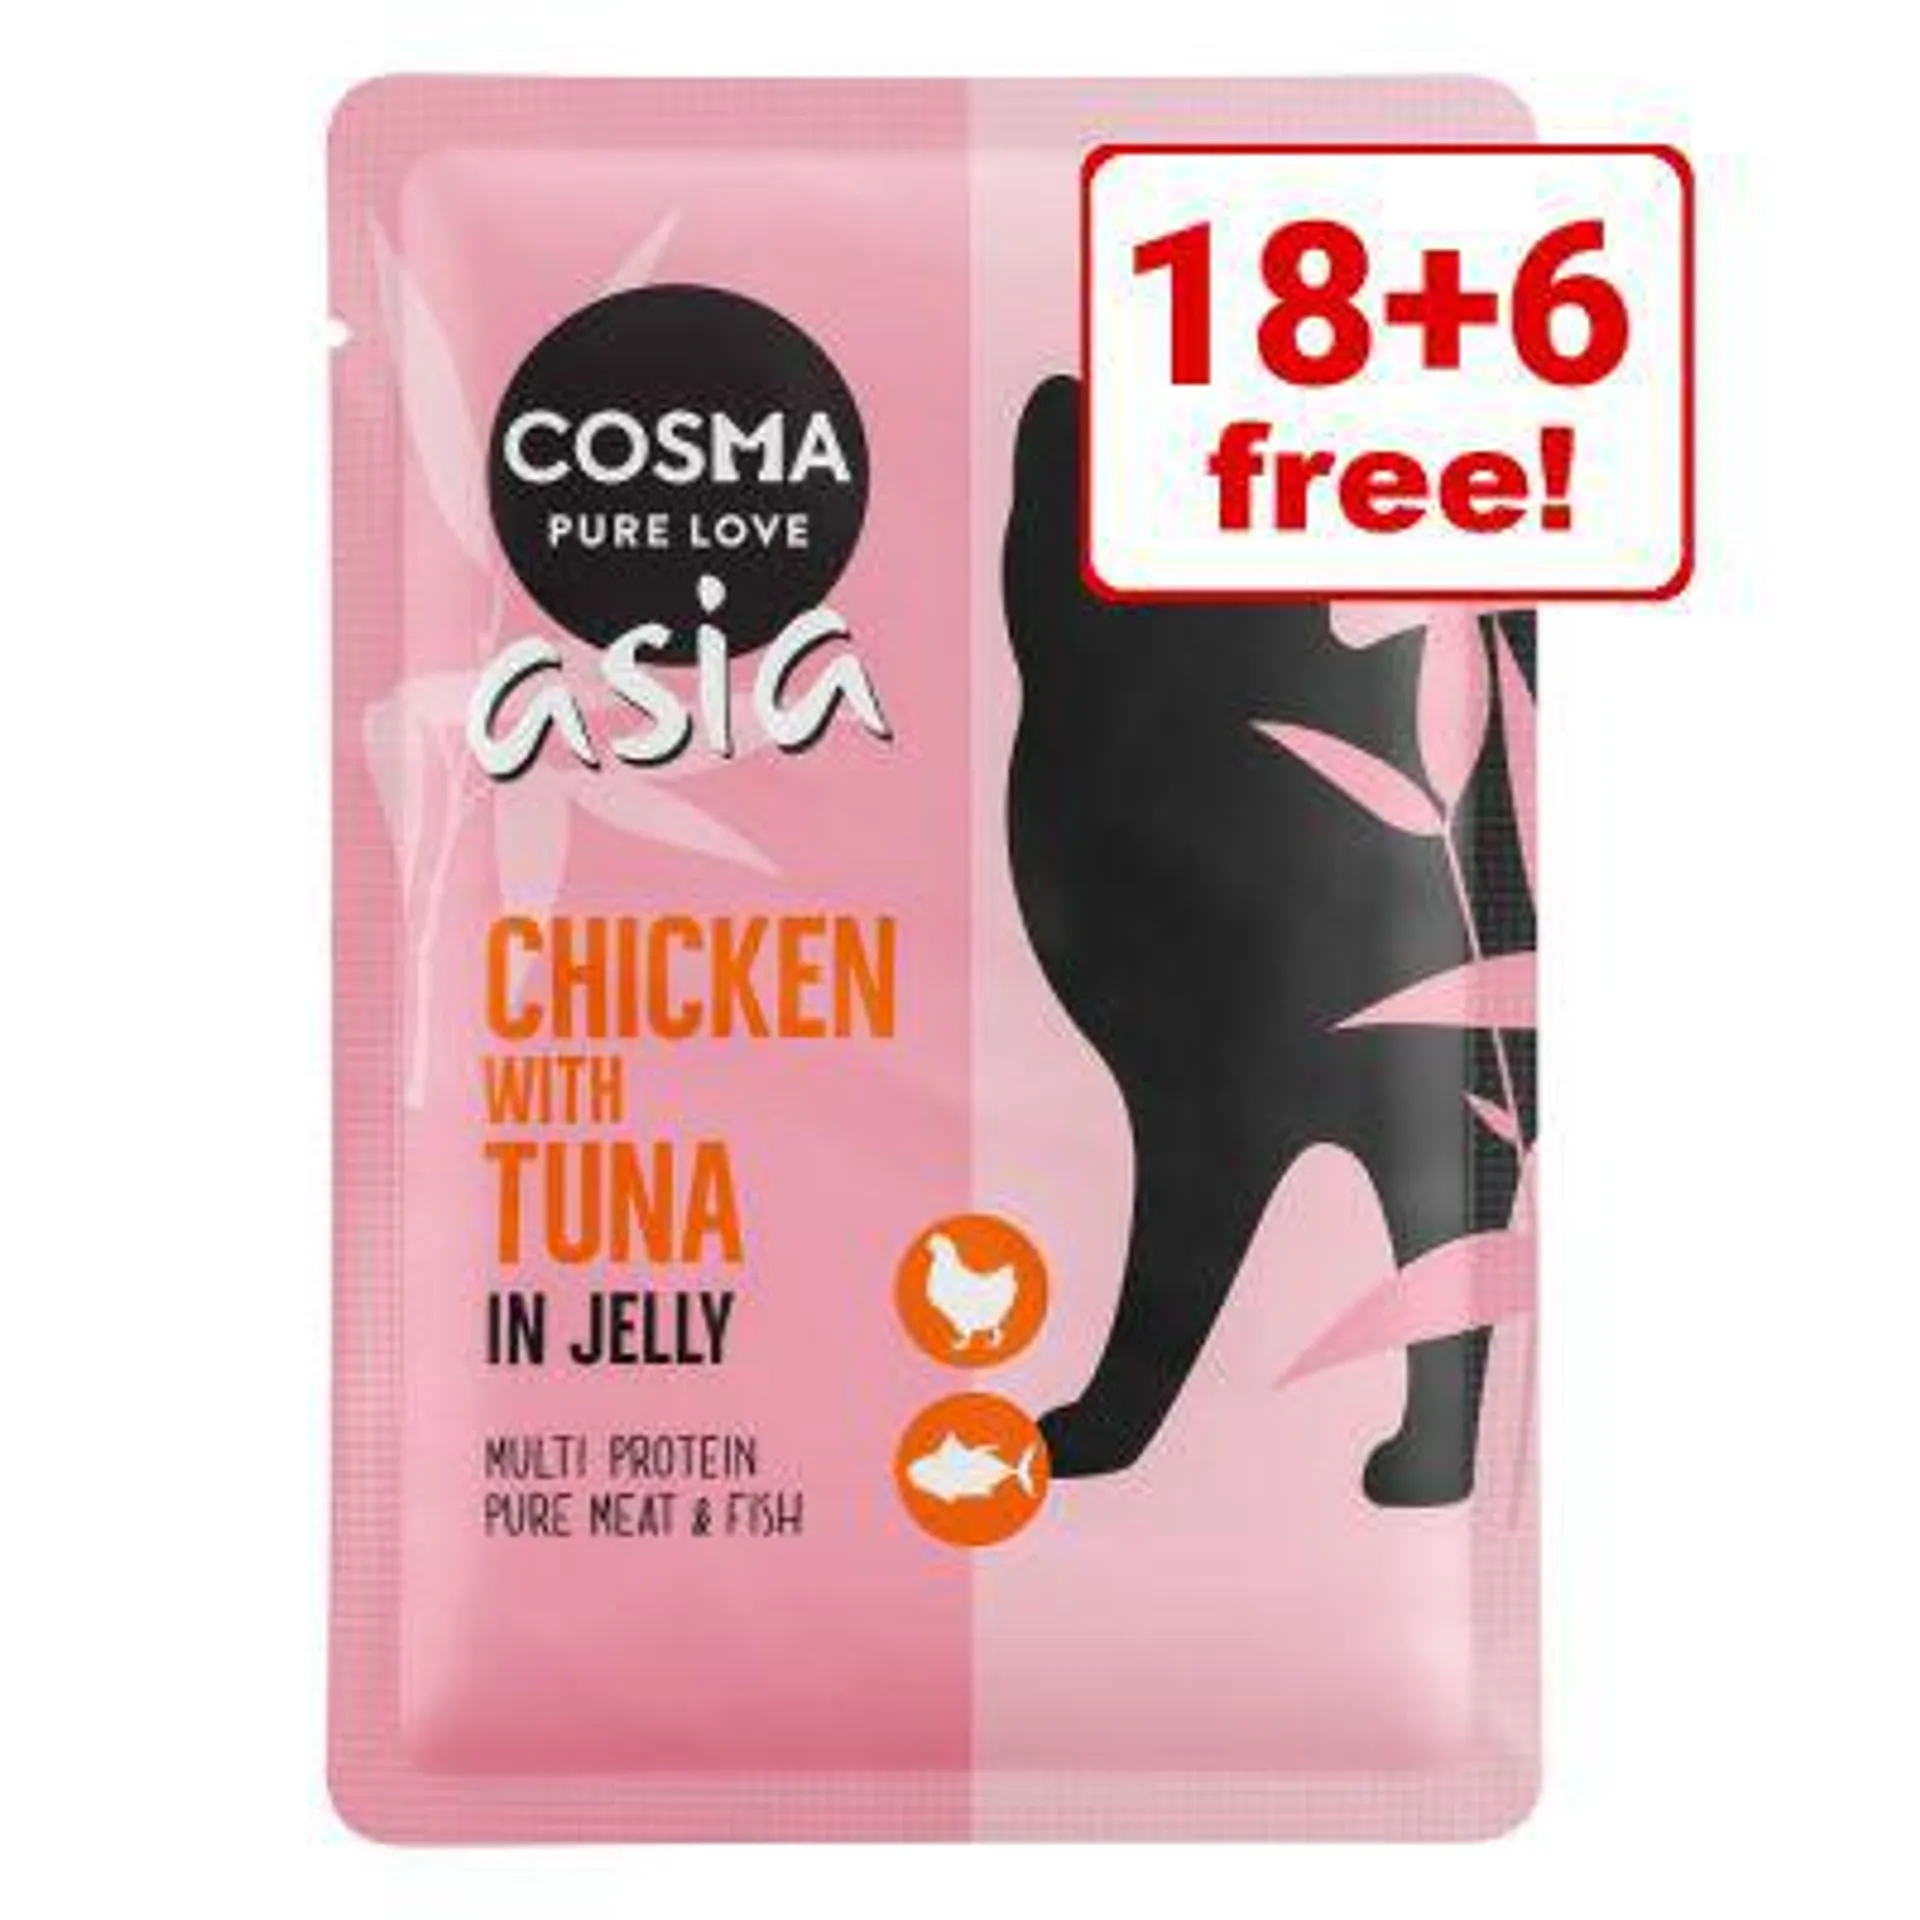 24 x 100g Cosma Pouches in Jelly Wet Cat Food - 18 + 6 Free!*